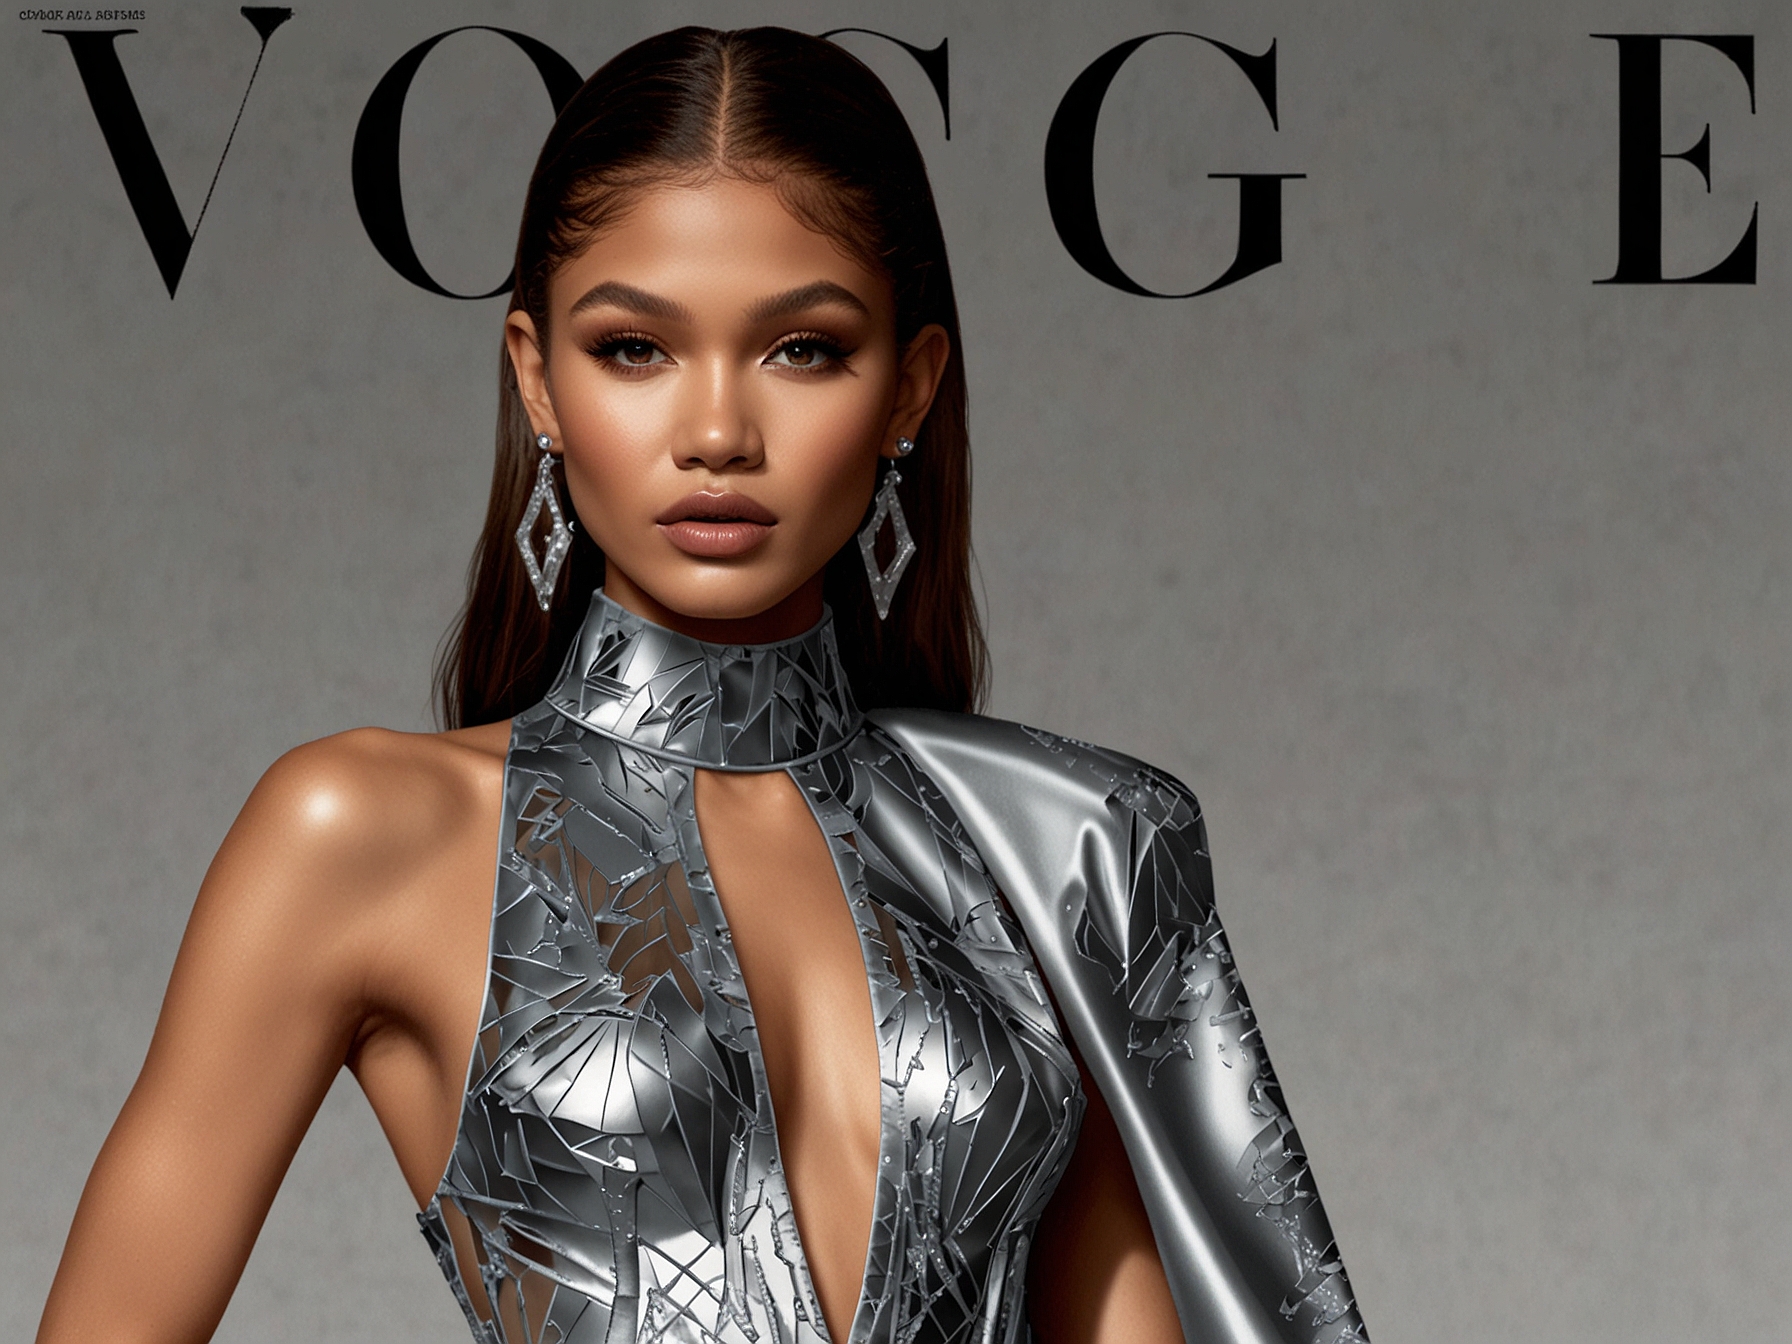 Zendaya dazzles at Vogue World 2024, wearing a futuristic metallic gown with geometric patterns. Her chic ensemble epitomizes the event's theme, merging athletic wear with high fashion details.